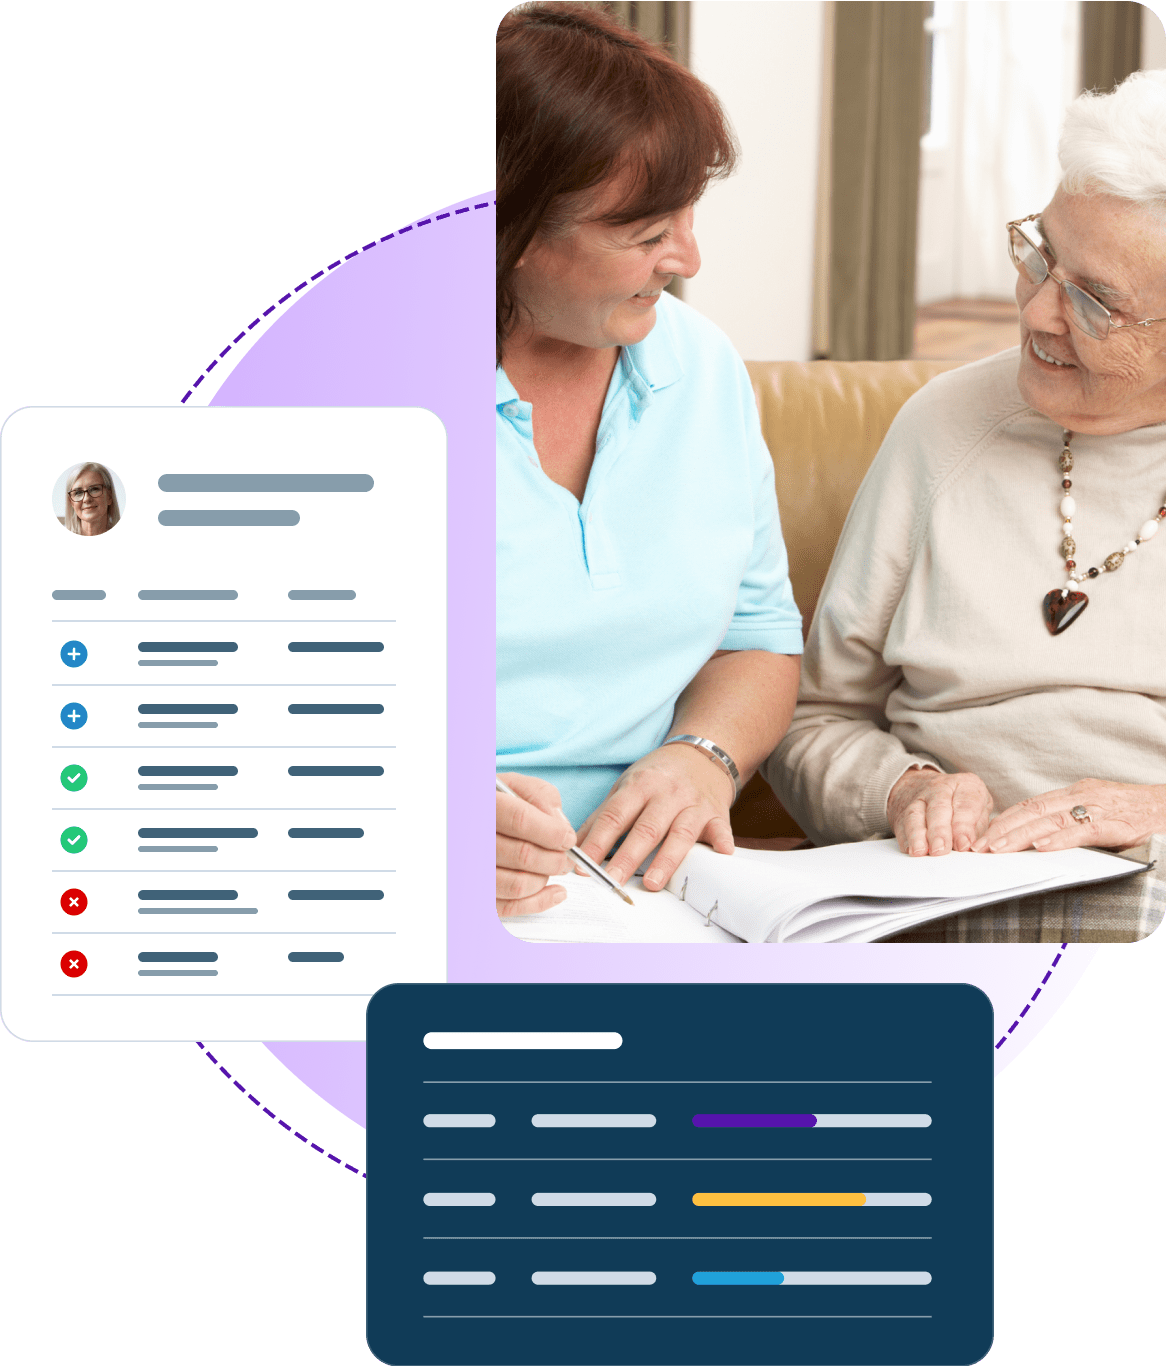 An image of a patient and caregiver in the home with illustrated medication review documents.